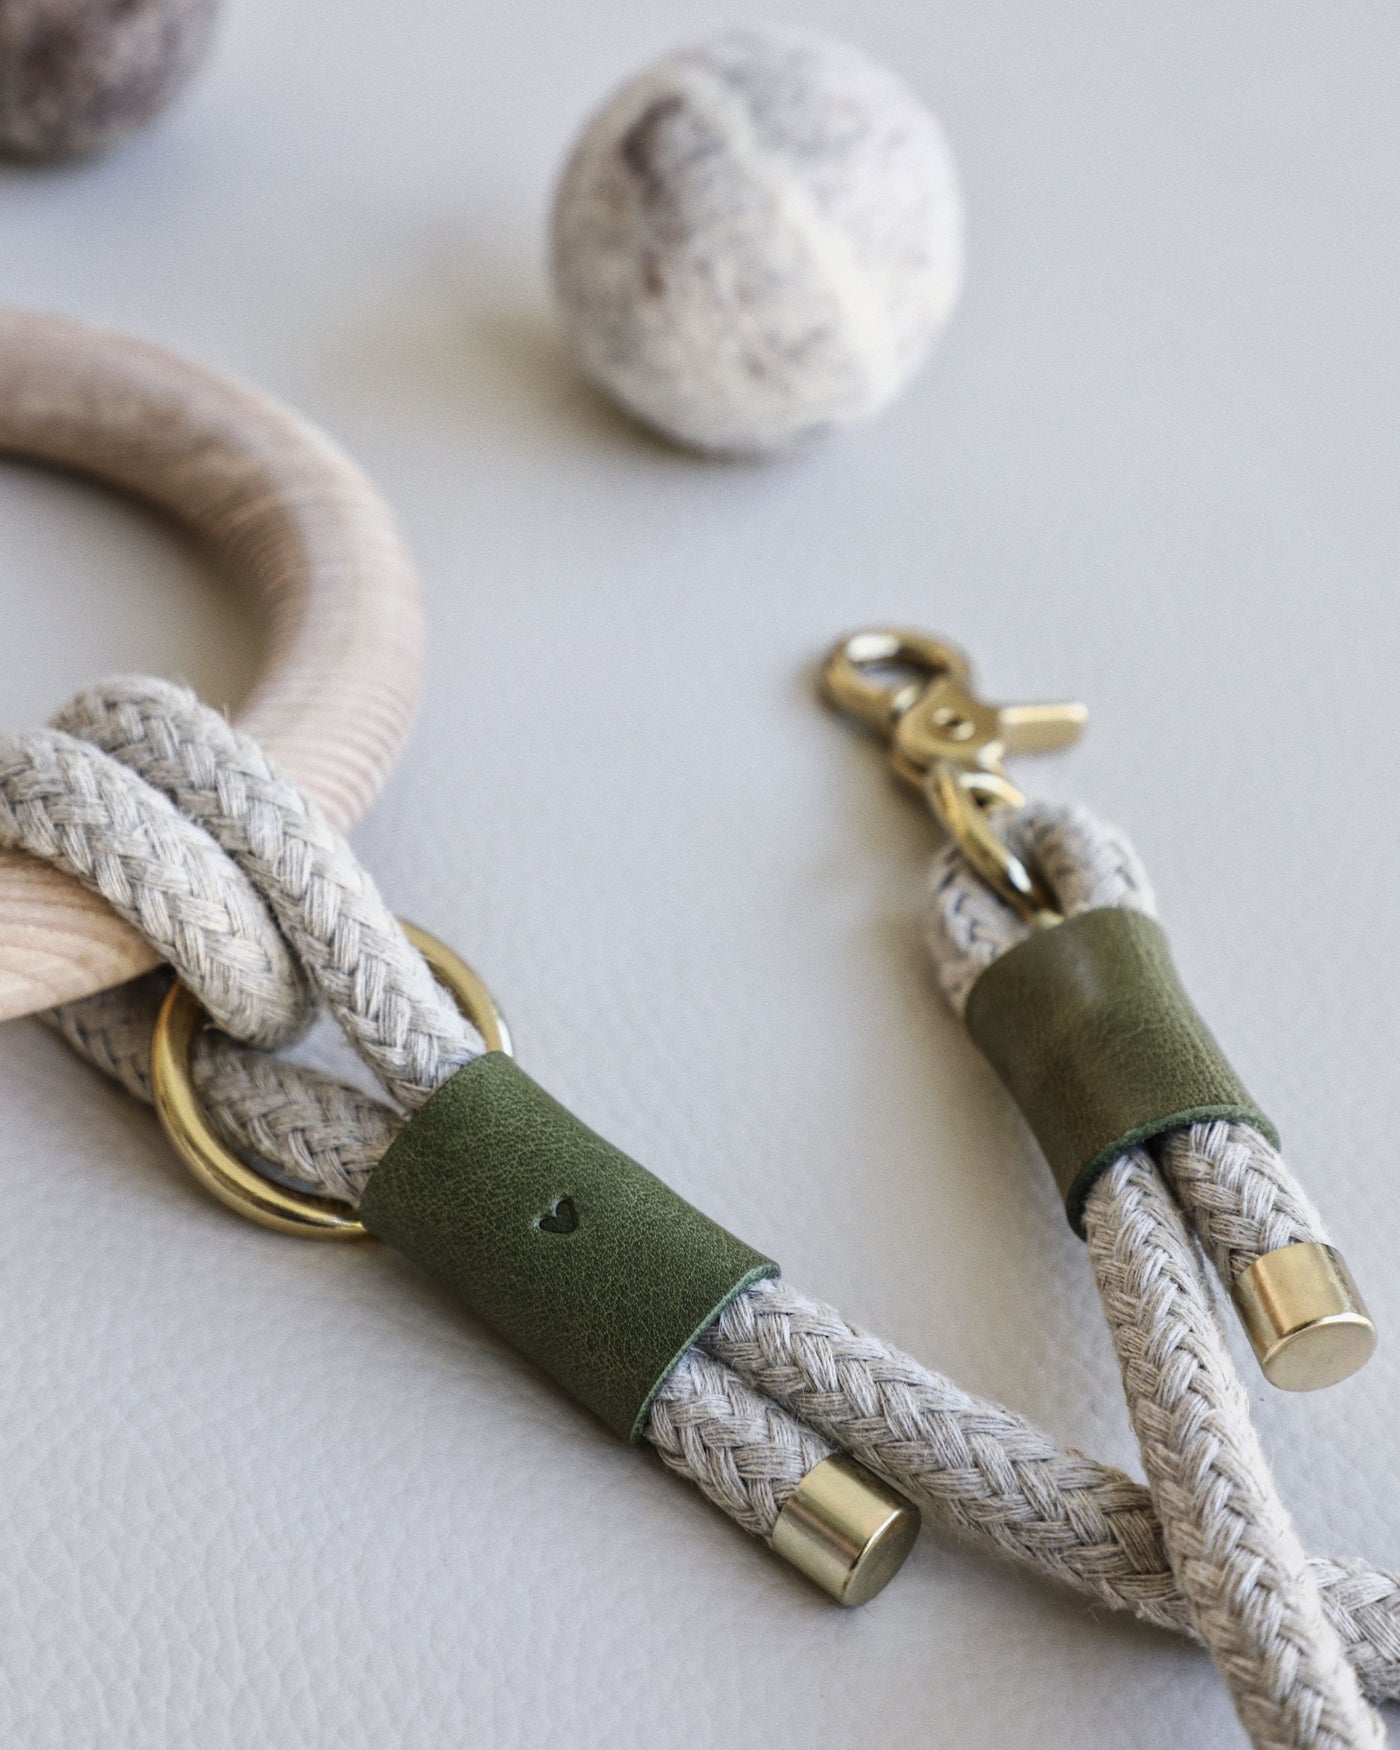 Rope leash connected to round dowel with green leather accents and gold hardware. close up of embossed heart in green leather